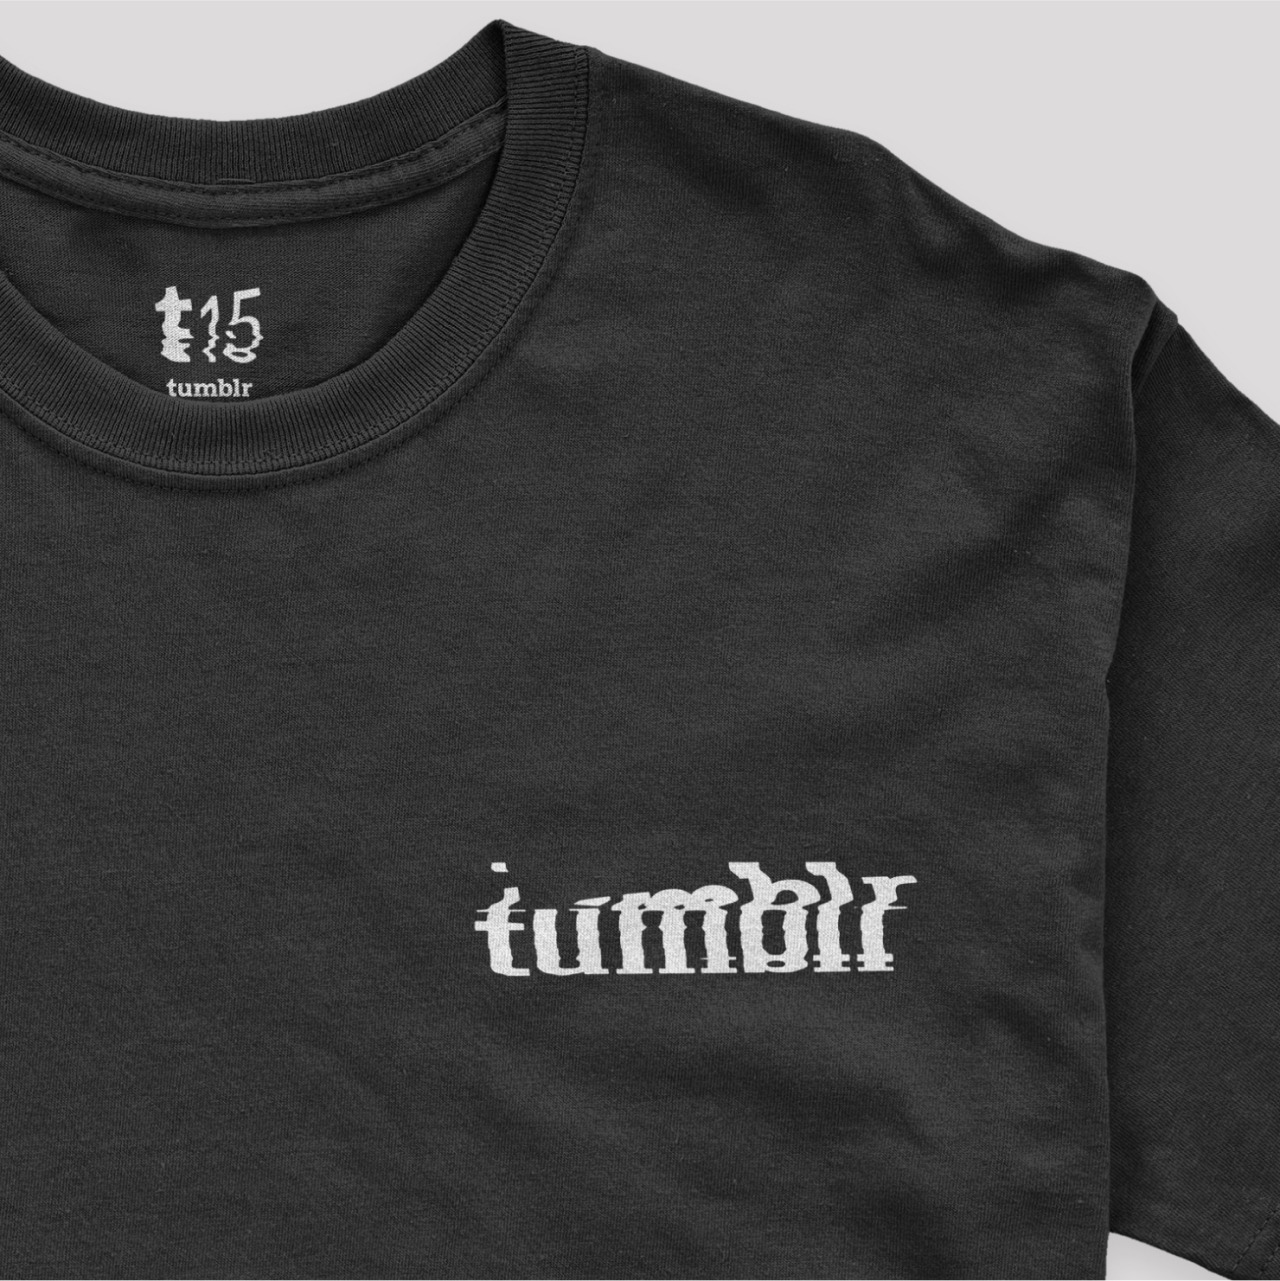 Glitch Logo T-Shirt$35.00There’s a ghost in this machine. Wear your freak flag.100% pre-shrunk cotton. Ready to ship in mid-March. #t15#tumblr shop#tumblr merch